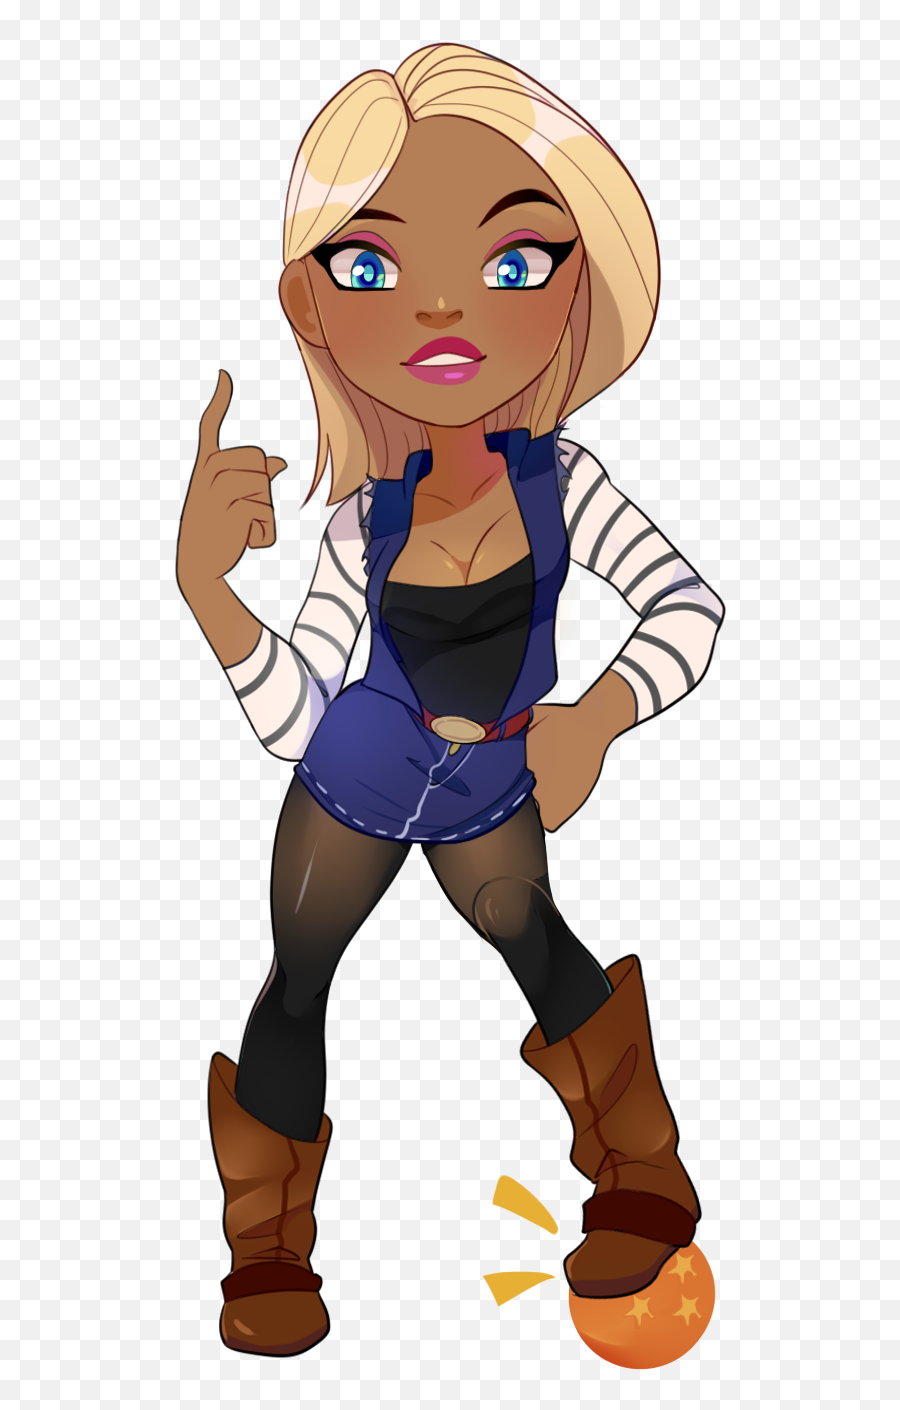 Android 18 - Android 18 Chibi Emoji,Android 18 Png